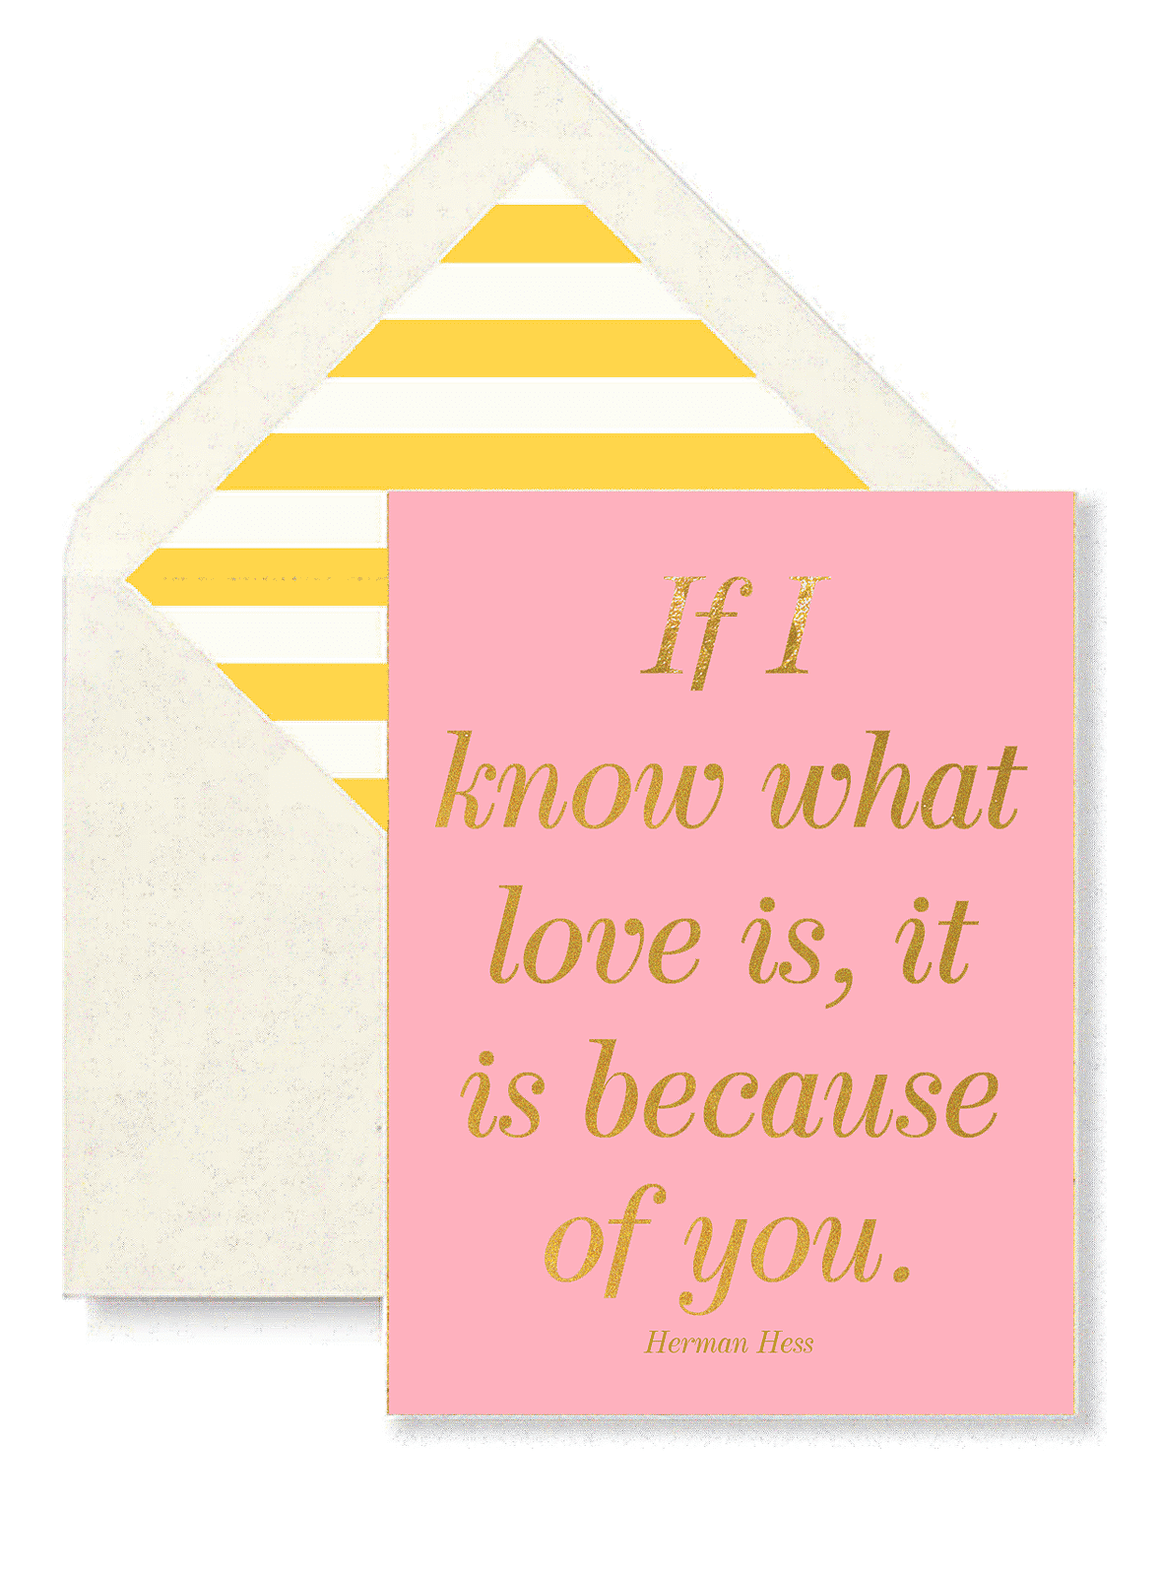 Bensgarden.com | If I Know What Love Is Greeting Card, Single Folded Card or Boxed Set of 8 - Ben's Garden. Made in New York City.